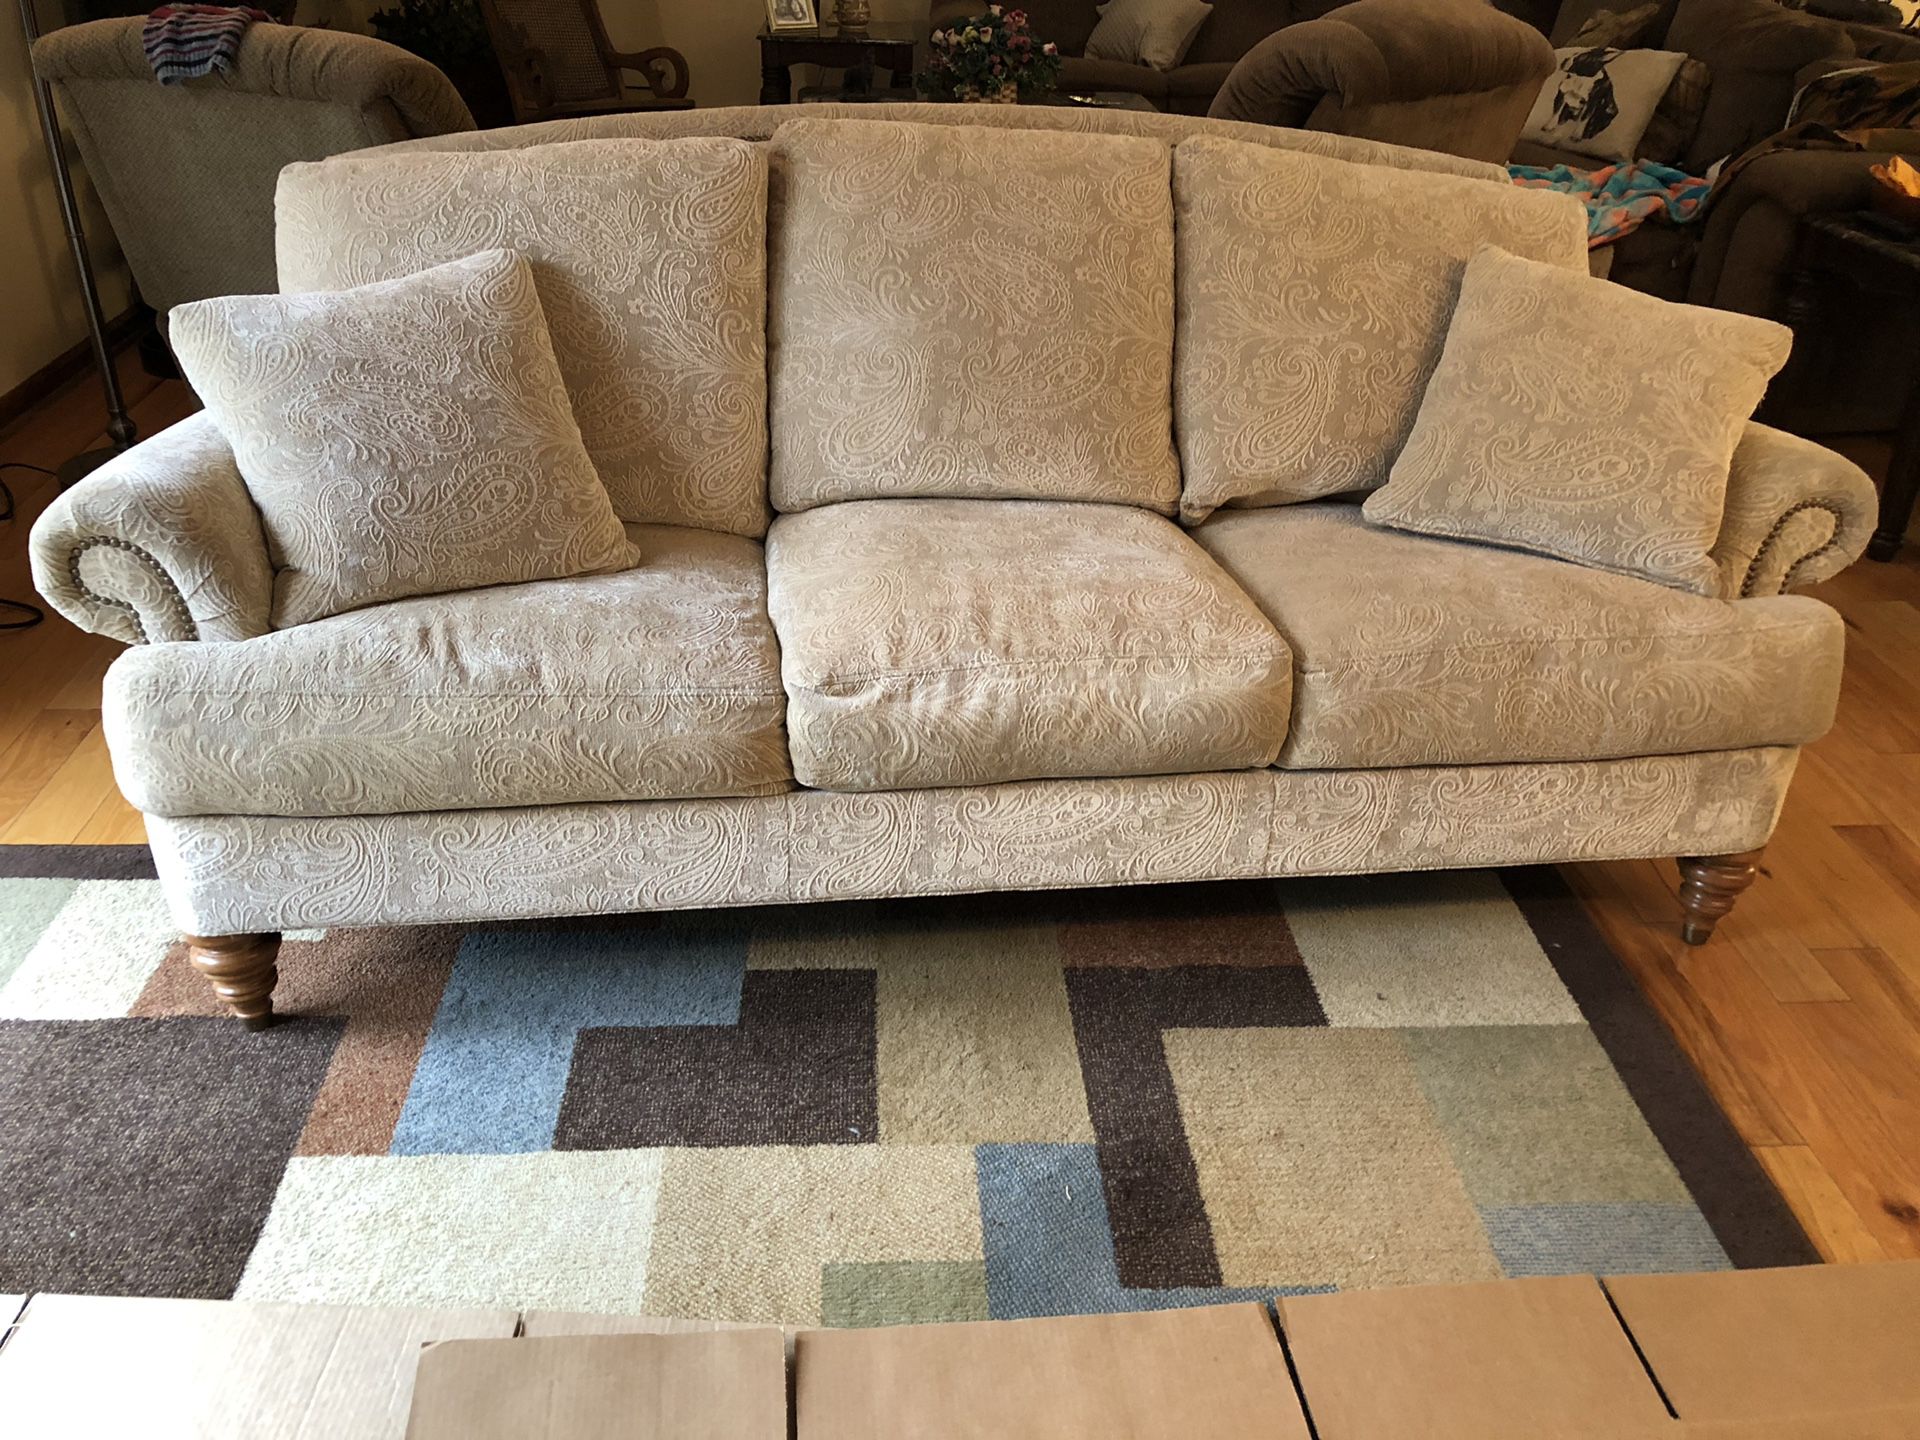 Ethan Allen paisley feathered blend couch nice clean & smoke free